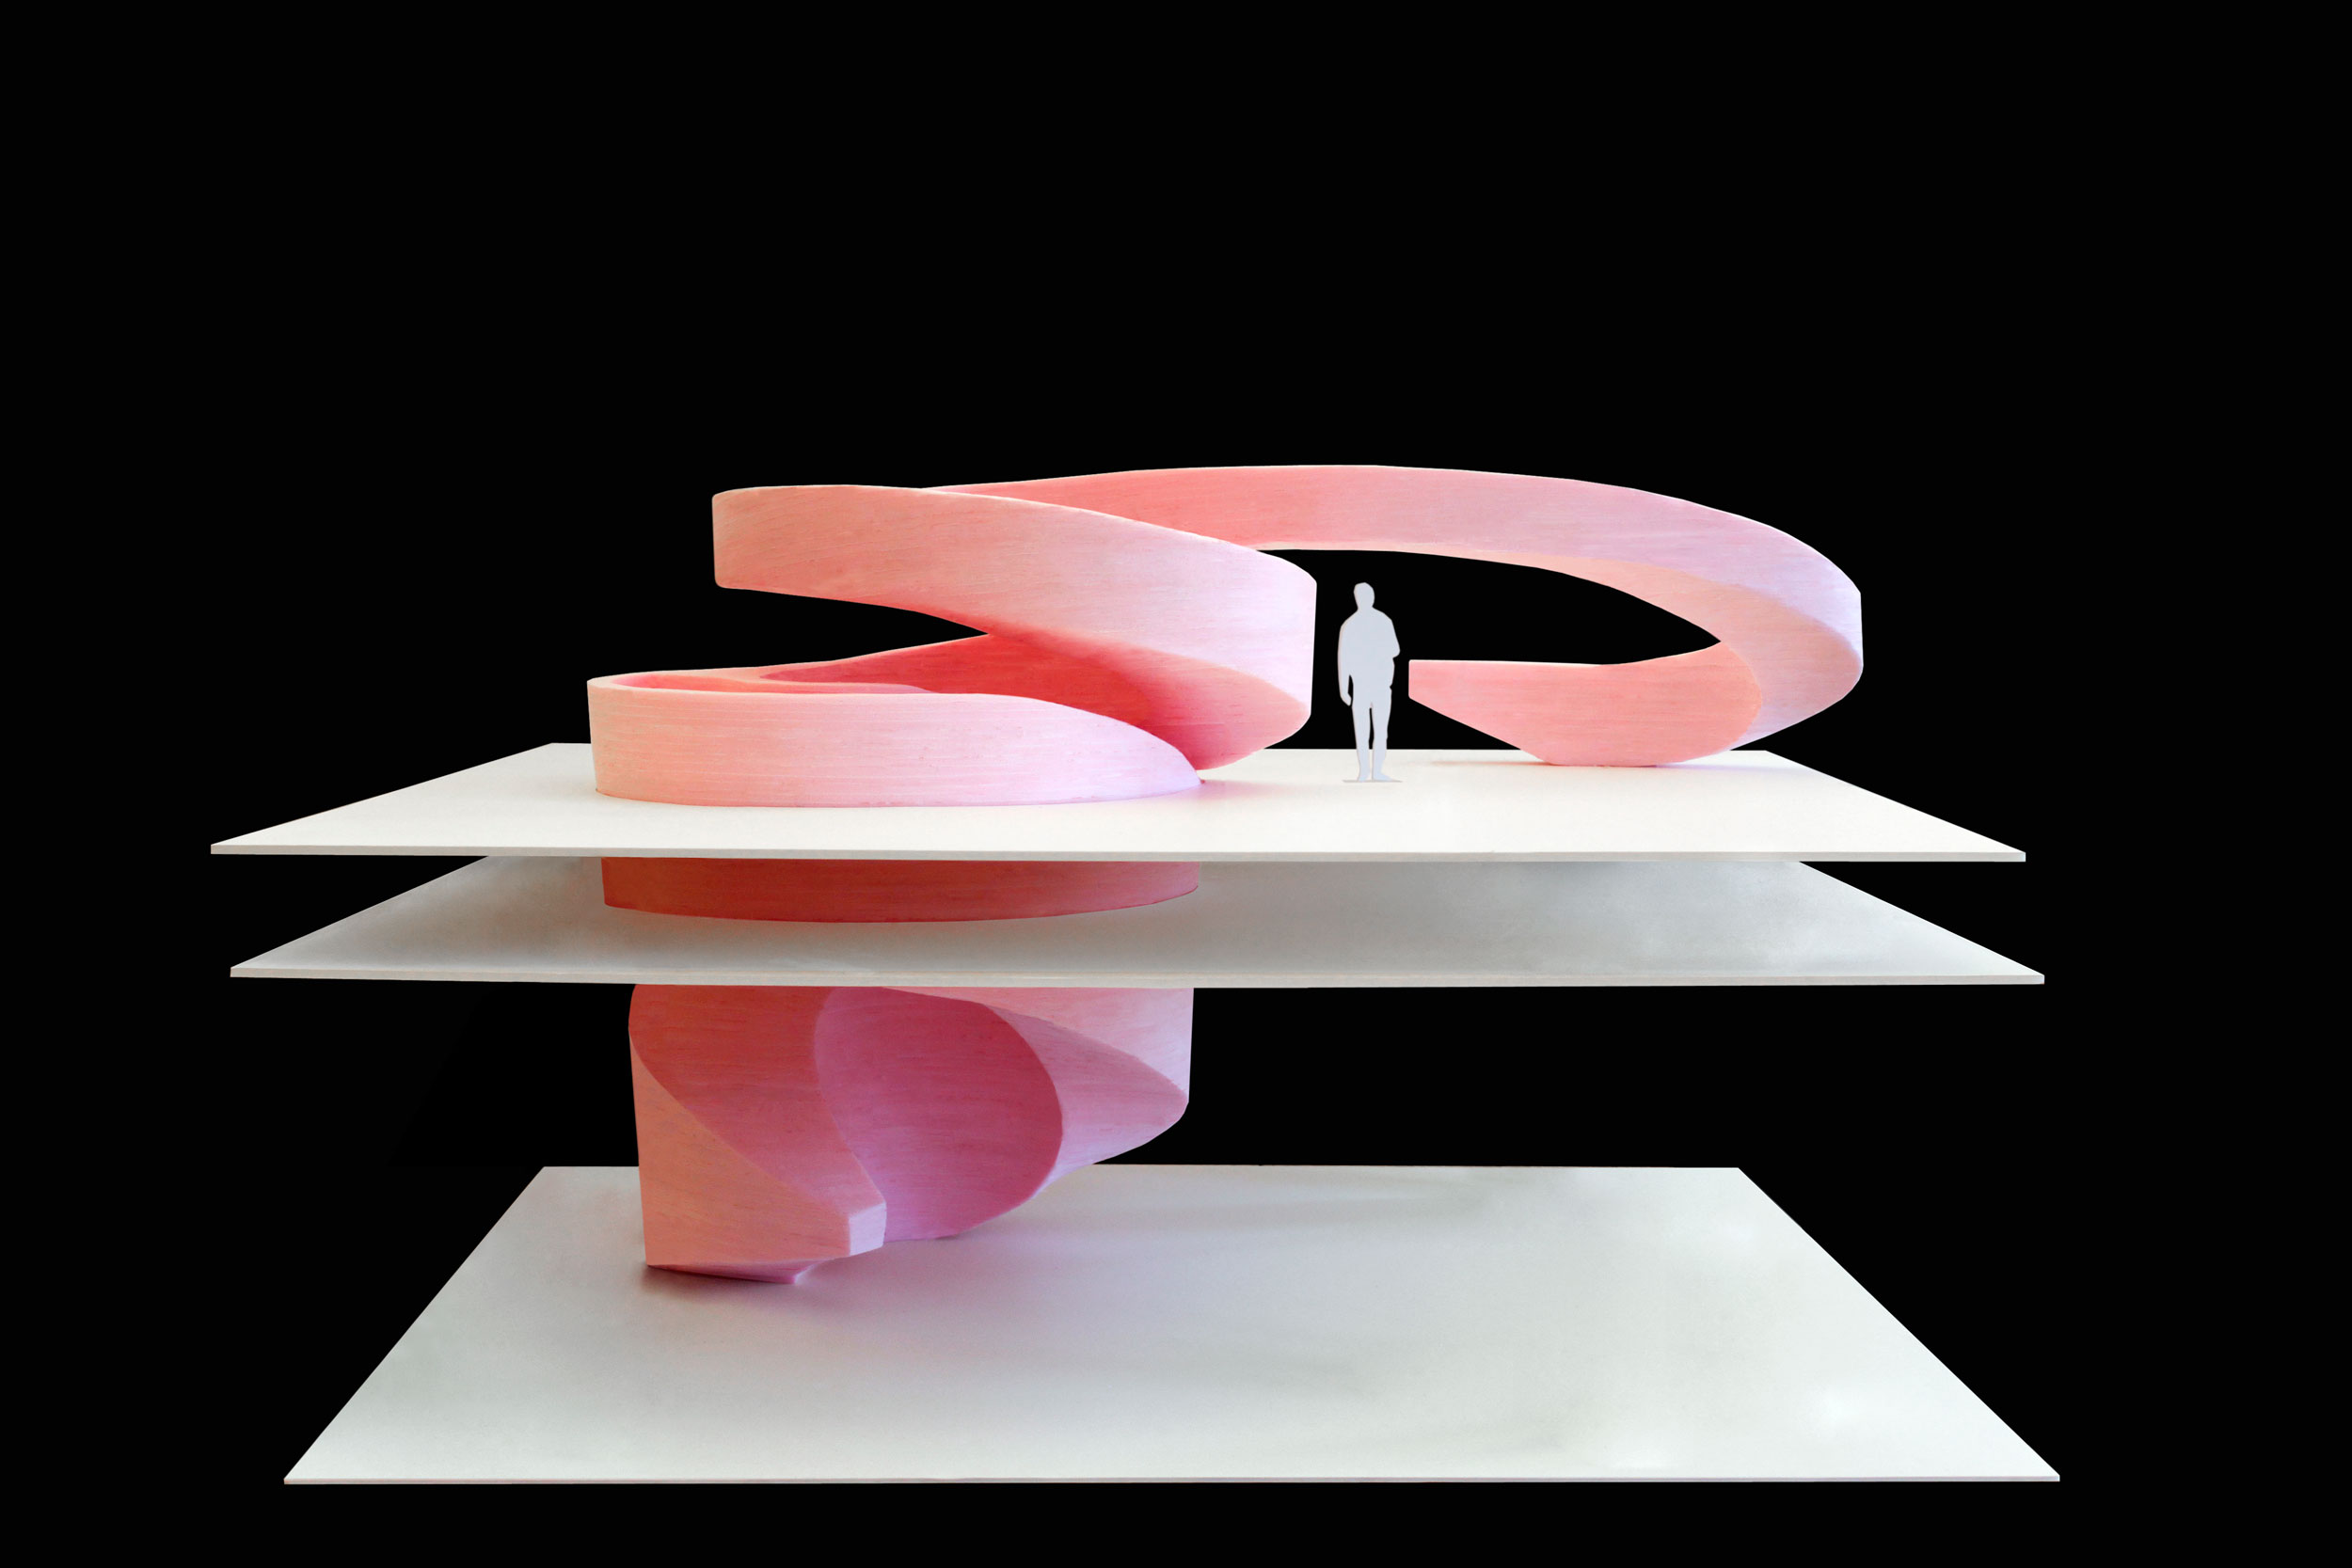 A photograph of the Necklace Residence sculptural stair model.